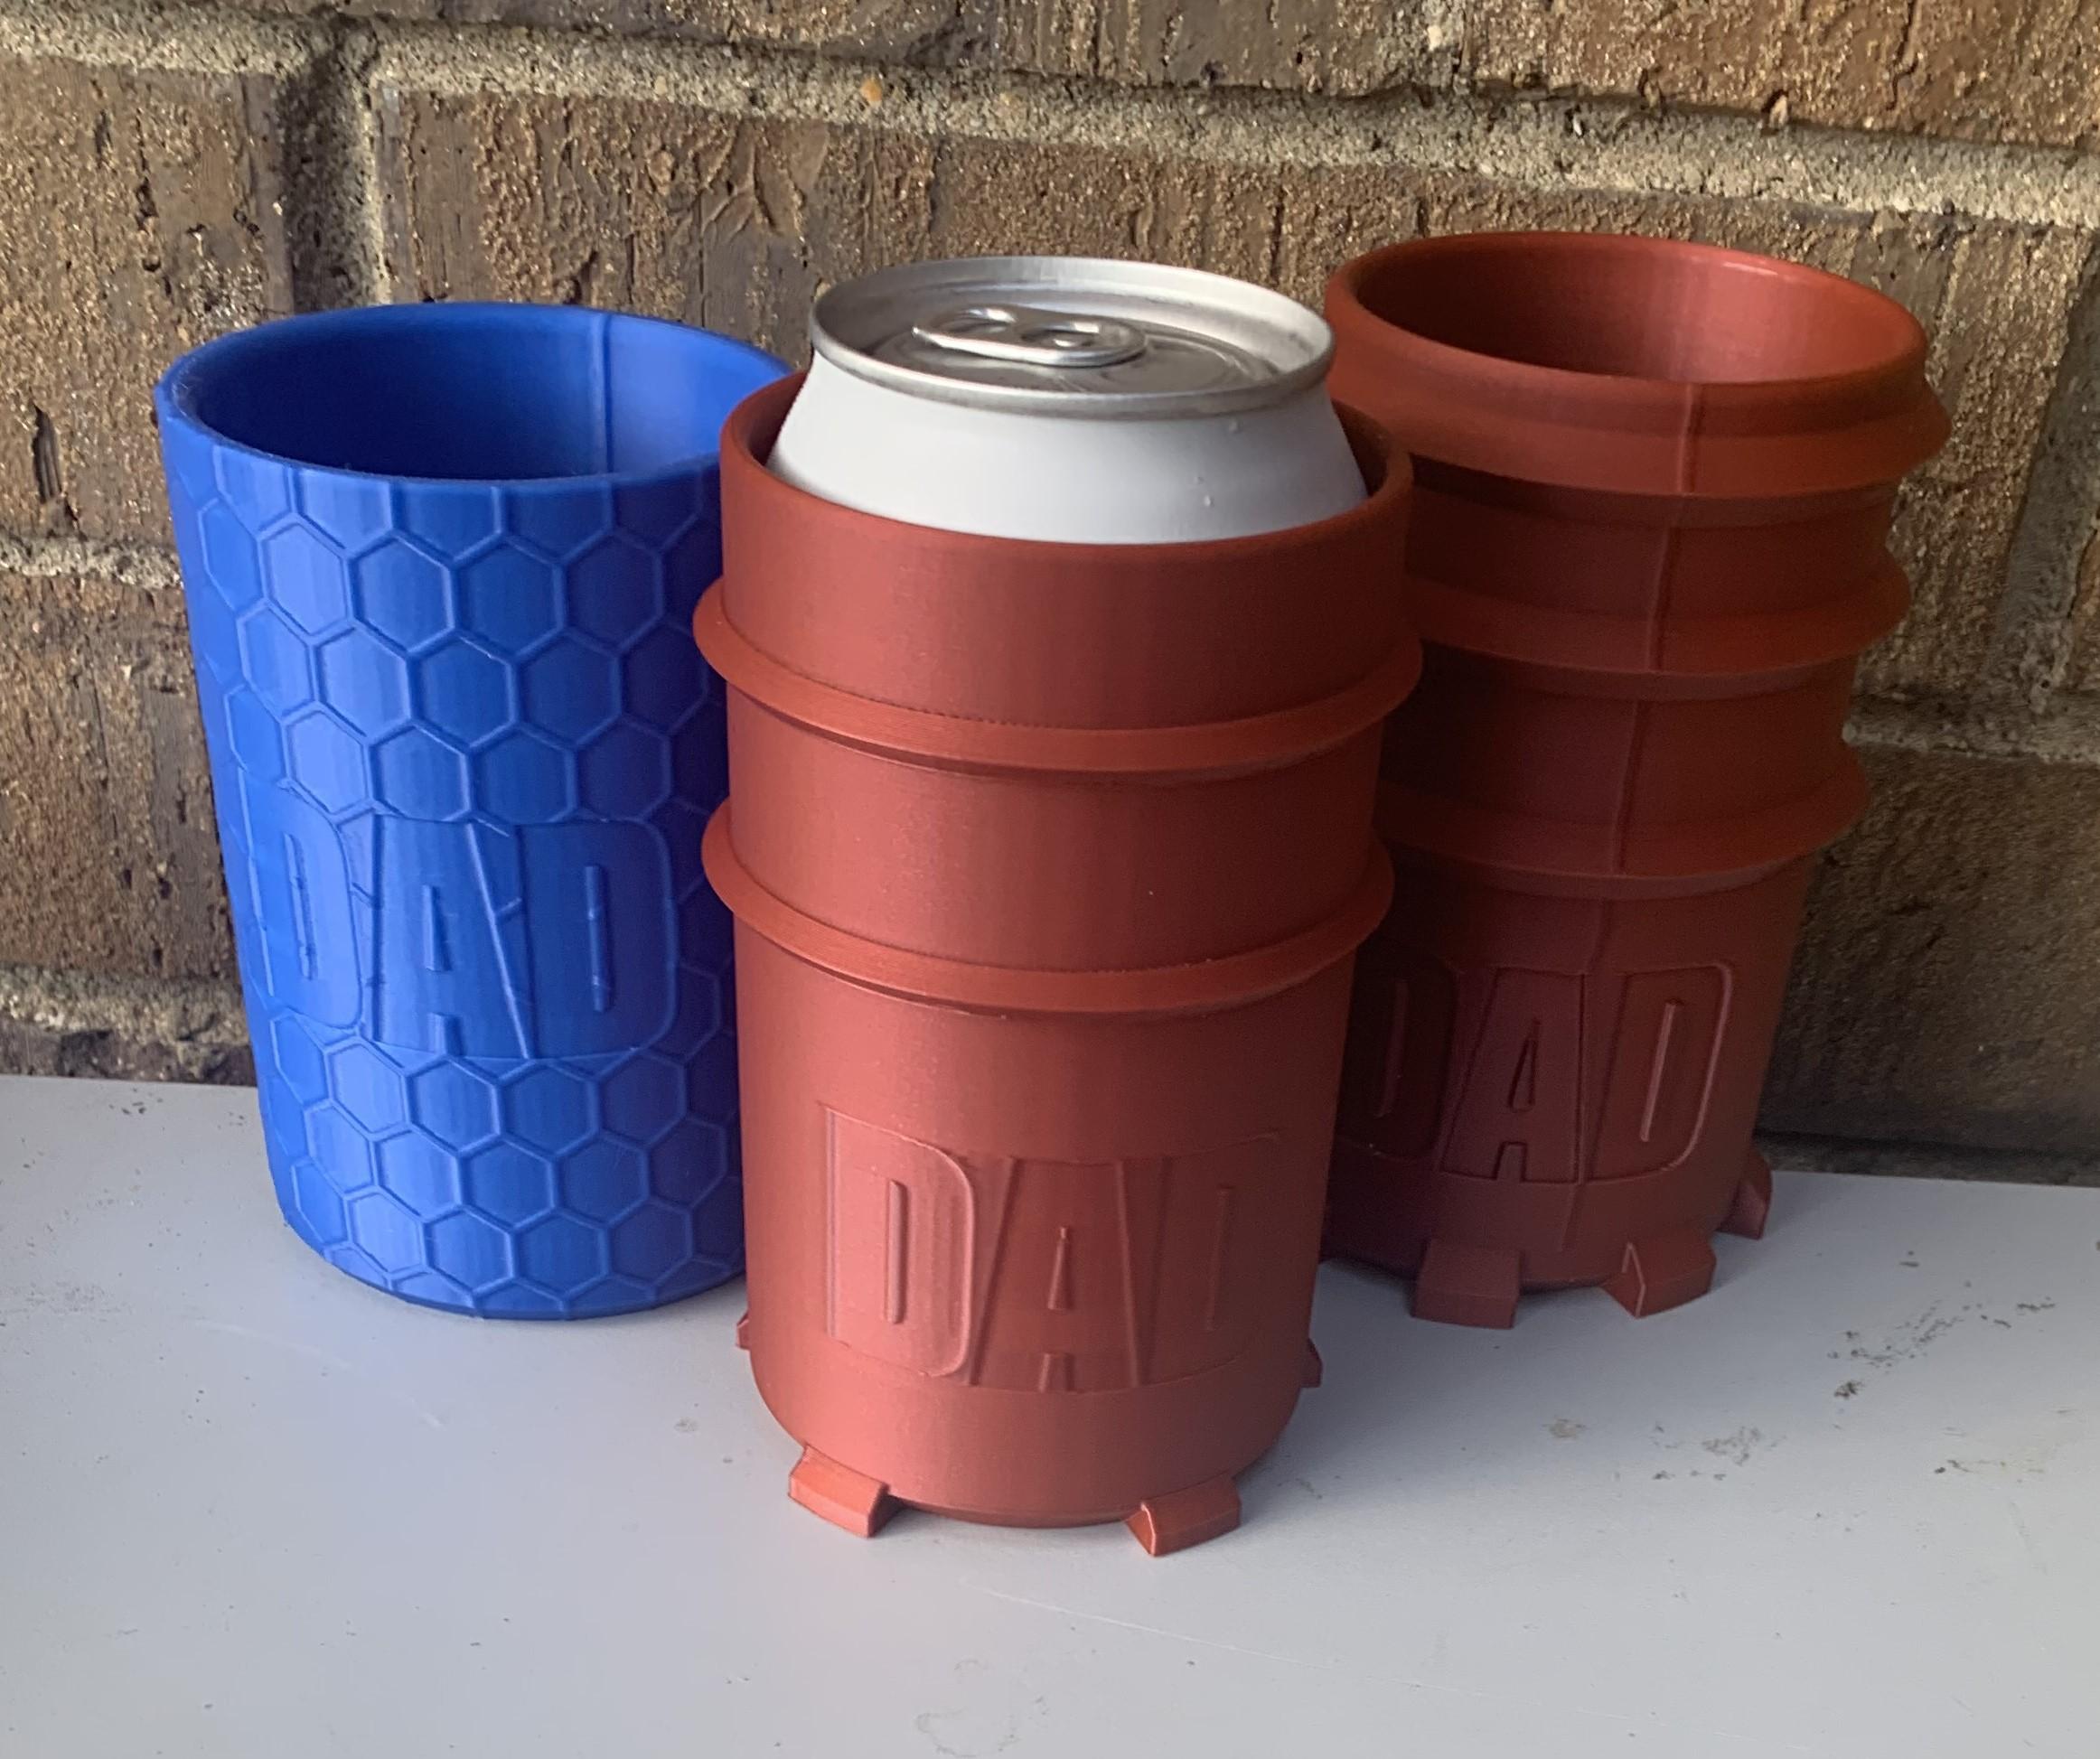 Dad can coozies 3d model